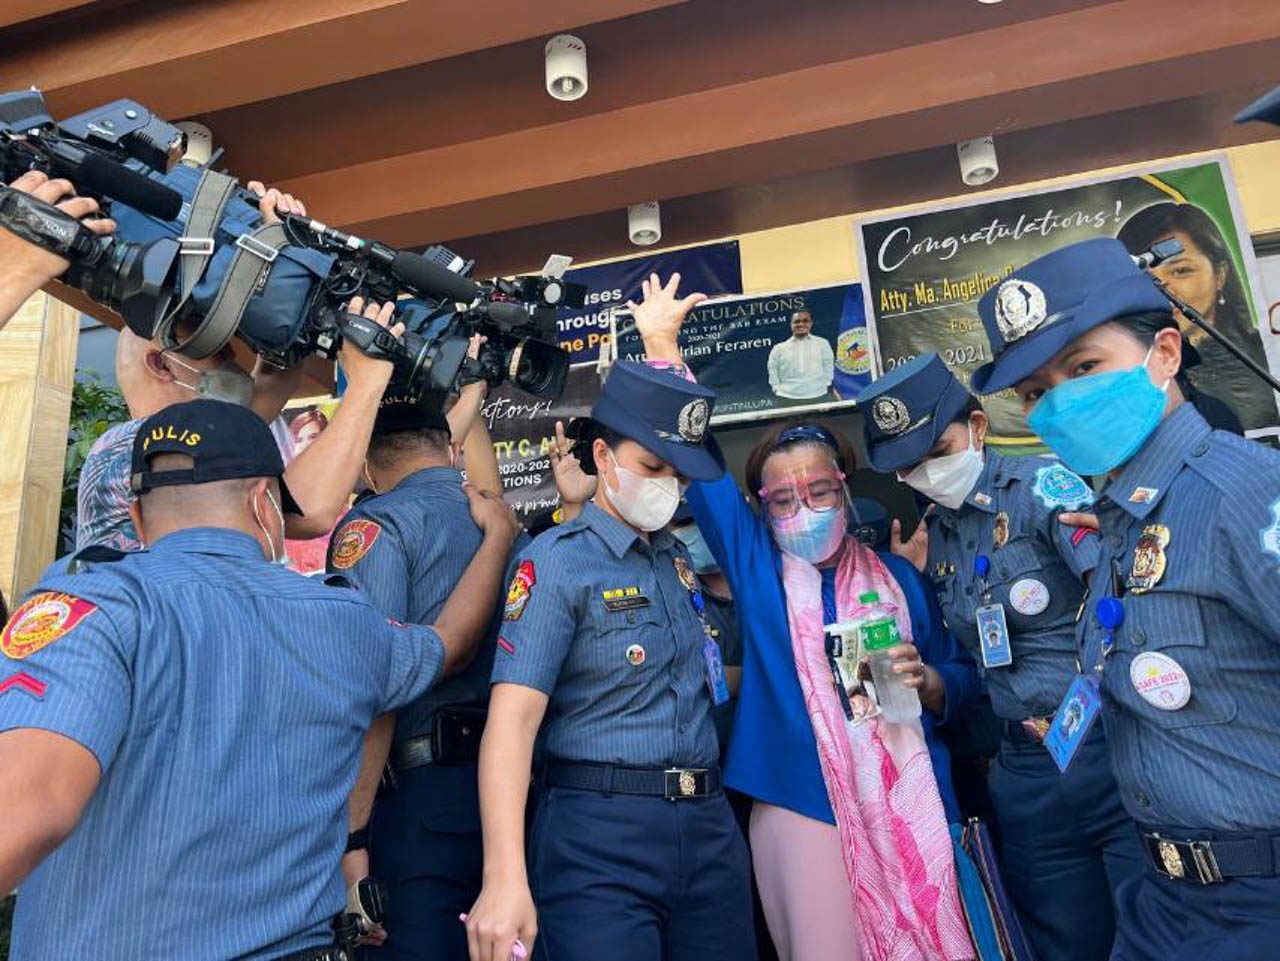 Detained, dehumanized: De Lima’s plight should’ve been an election issue